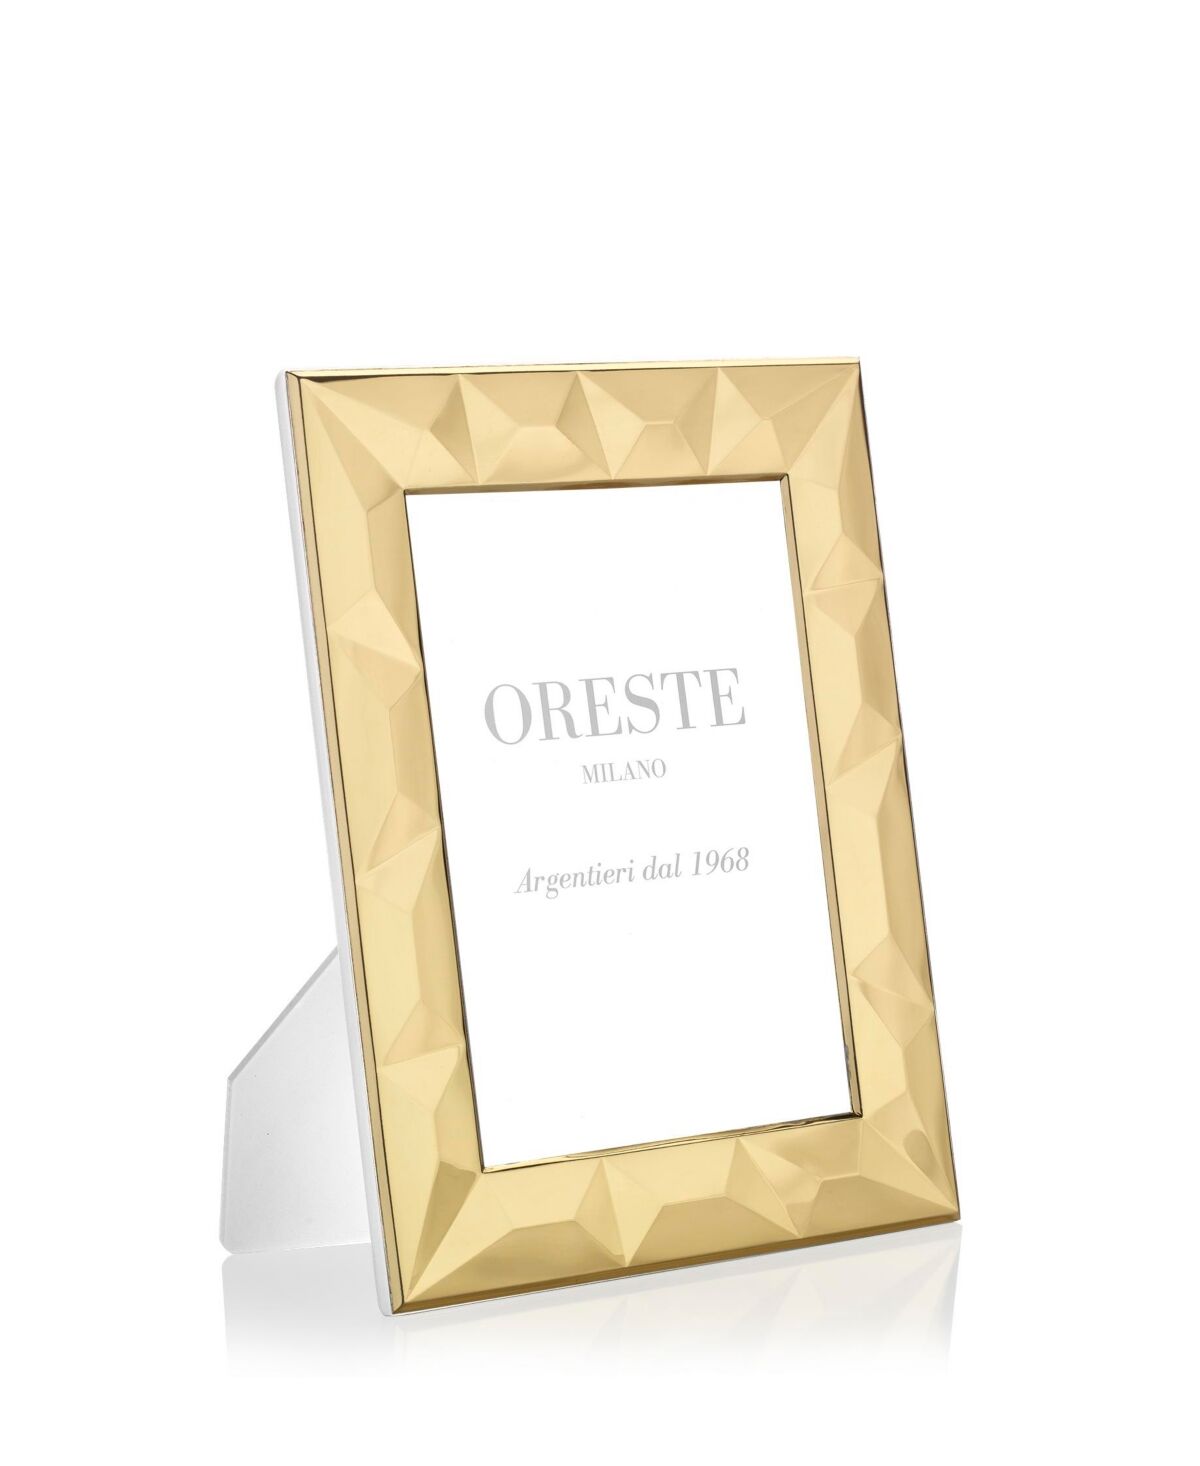 Oreste Milano 5x7 Gold Plated Picture Frame on a White Lacquered Wooden Back - Gold